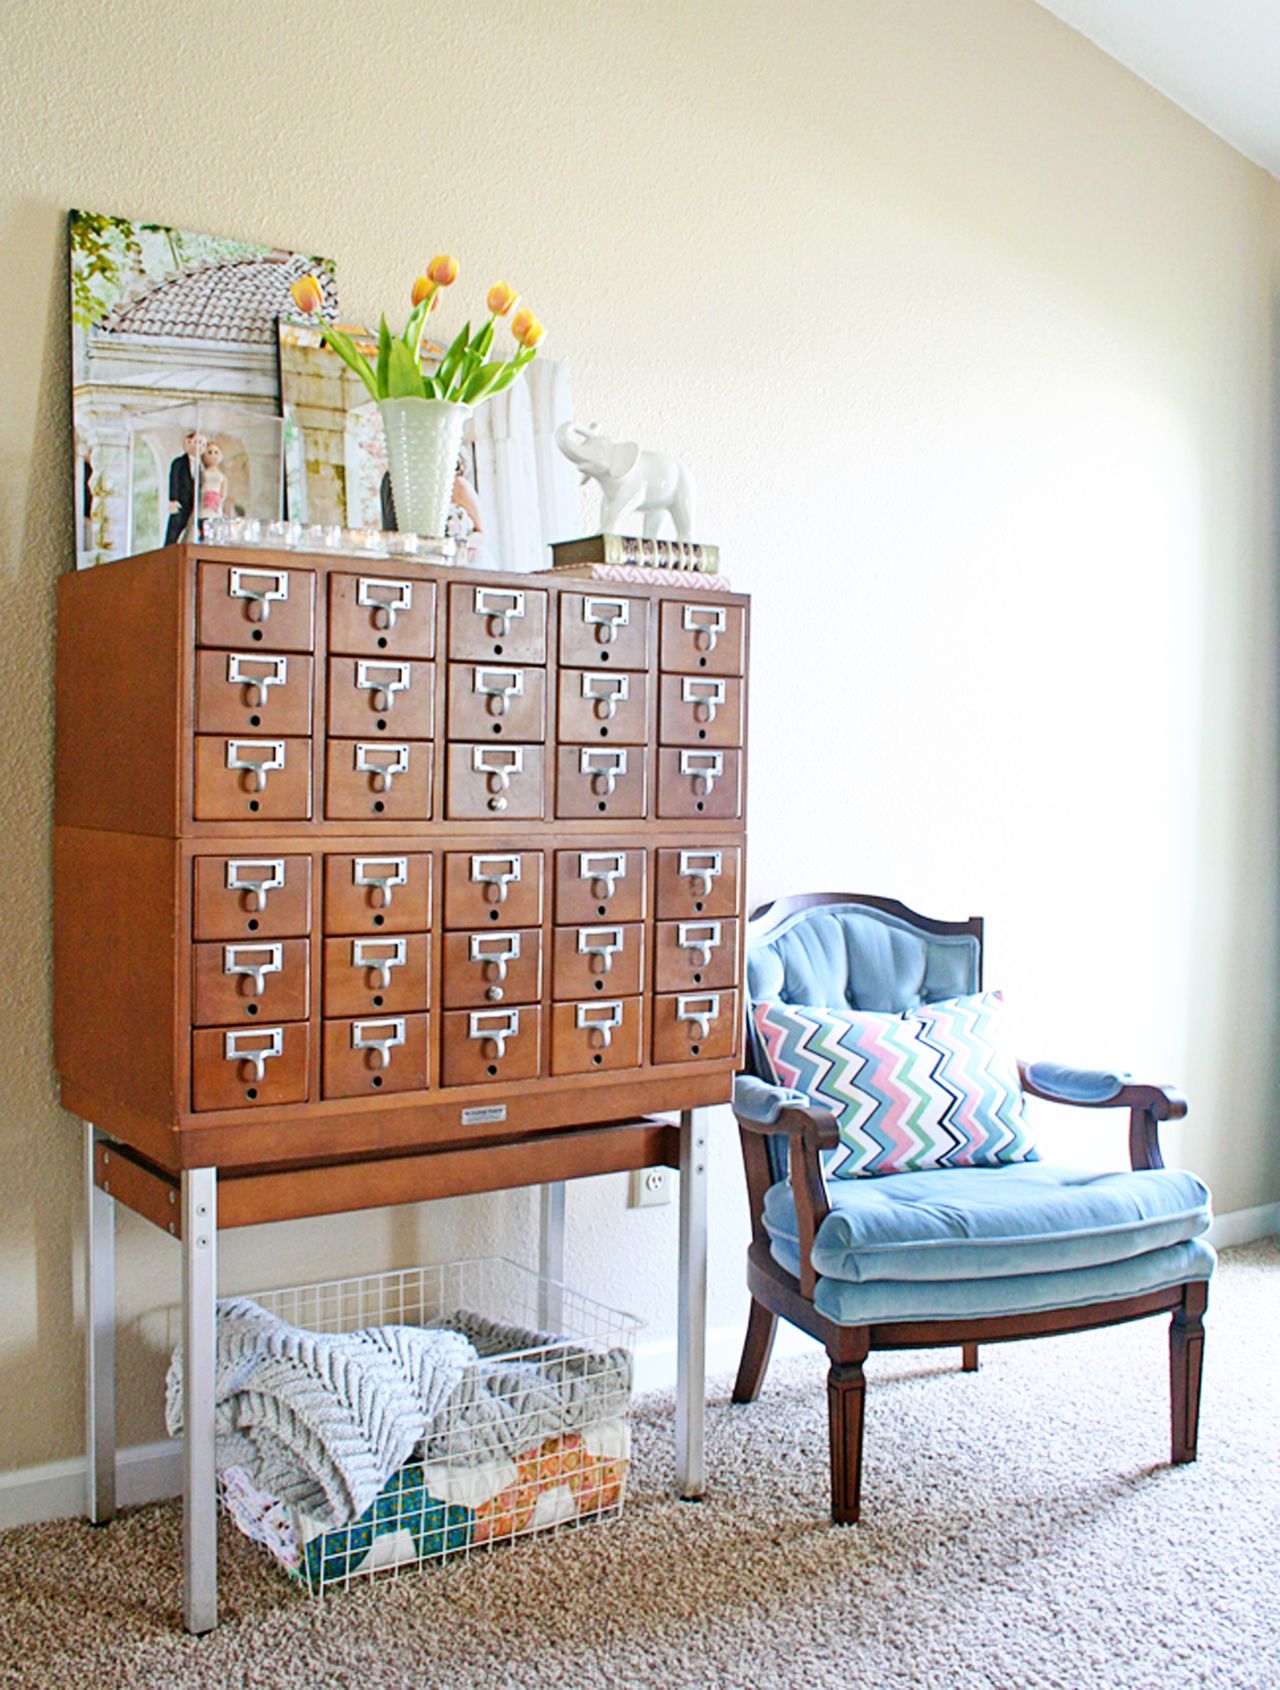 McDonnough loves elephants, and included a petite elephant planter to the top of her vintage library card catalog.